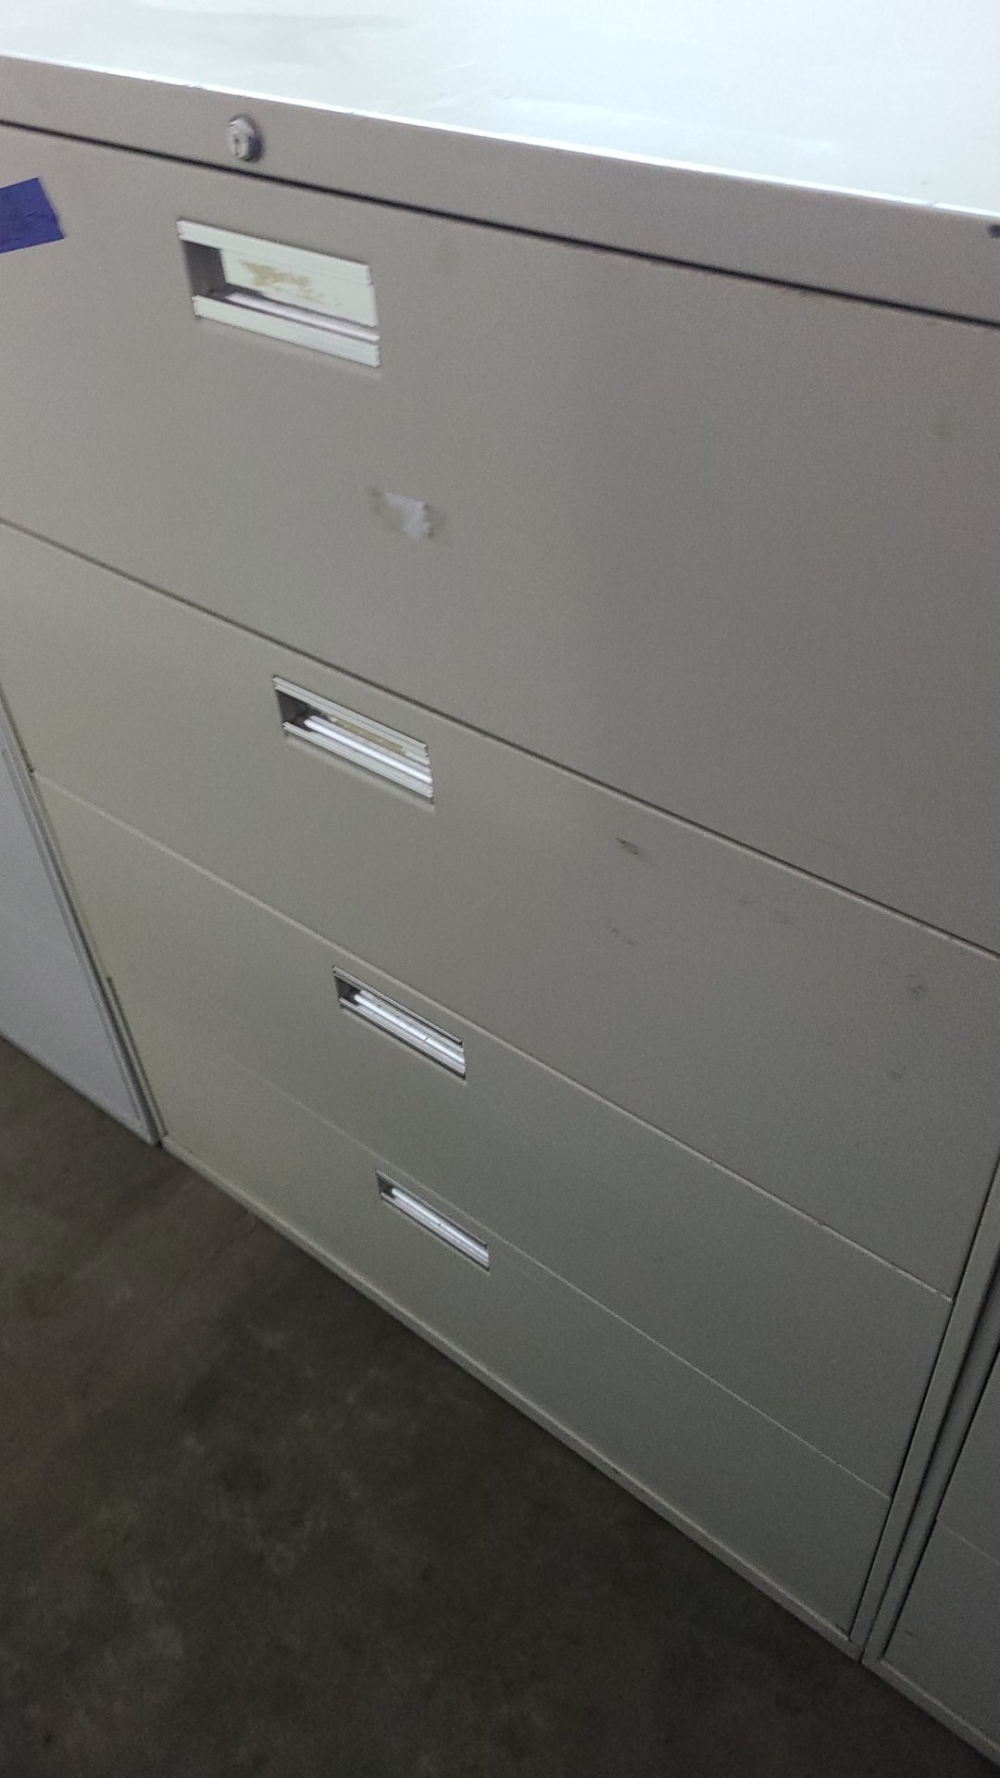  4 DRAWER LATERAL